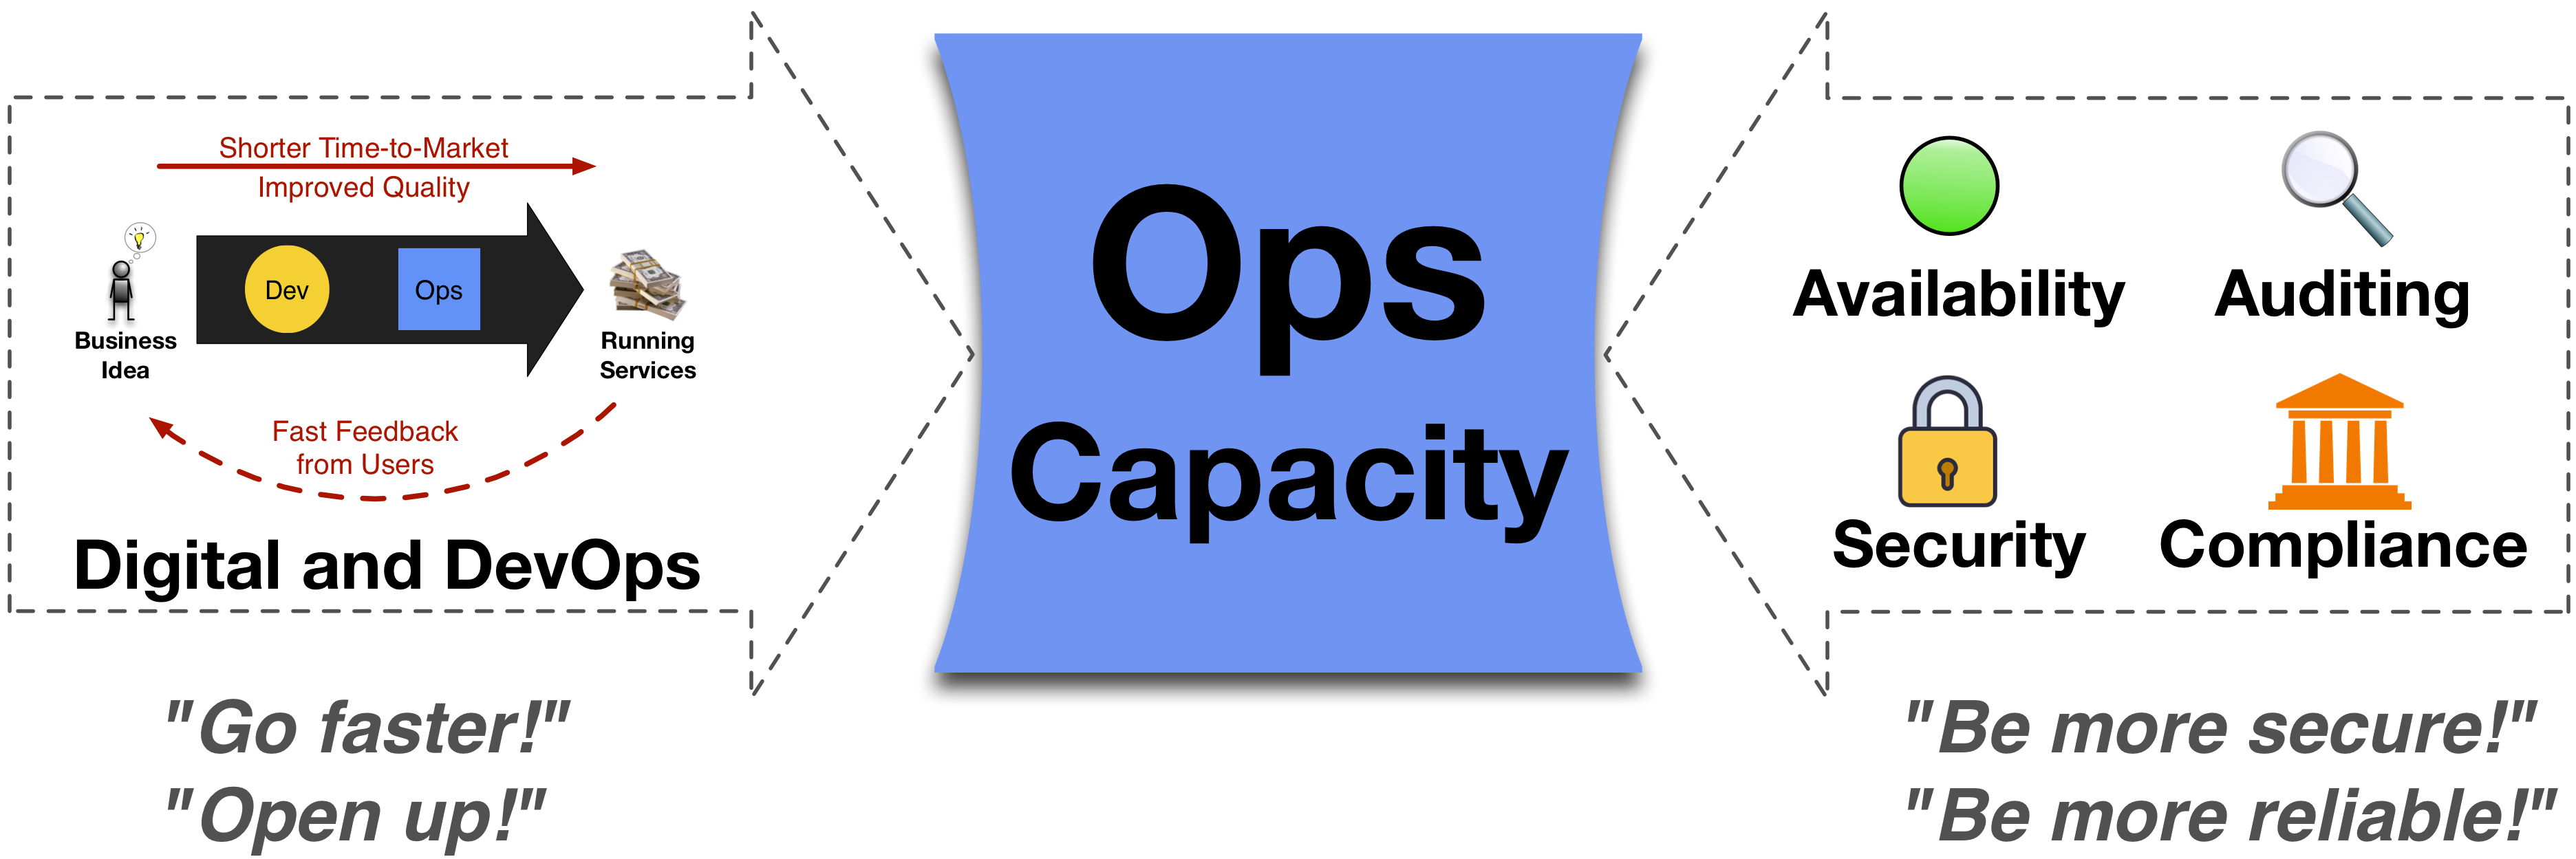 Operations is squeezed in a capacity crunch